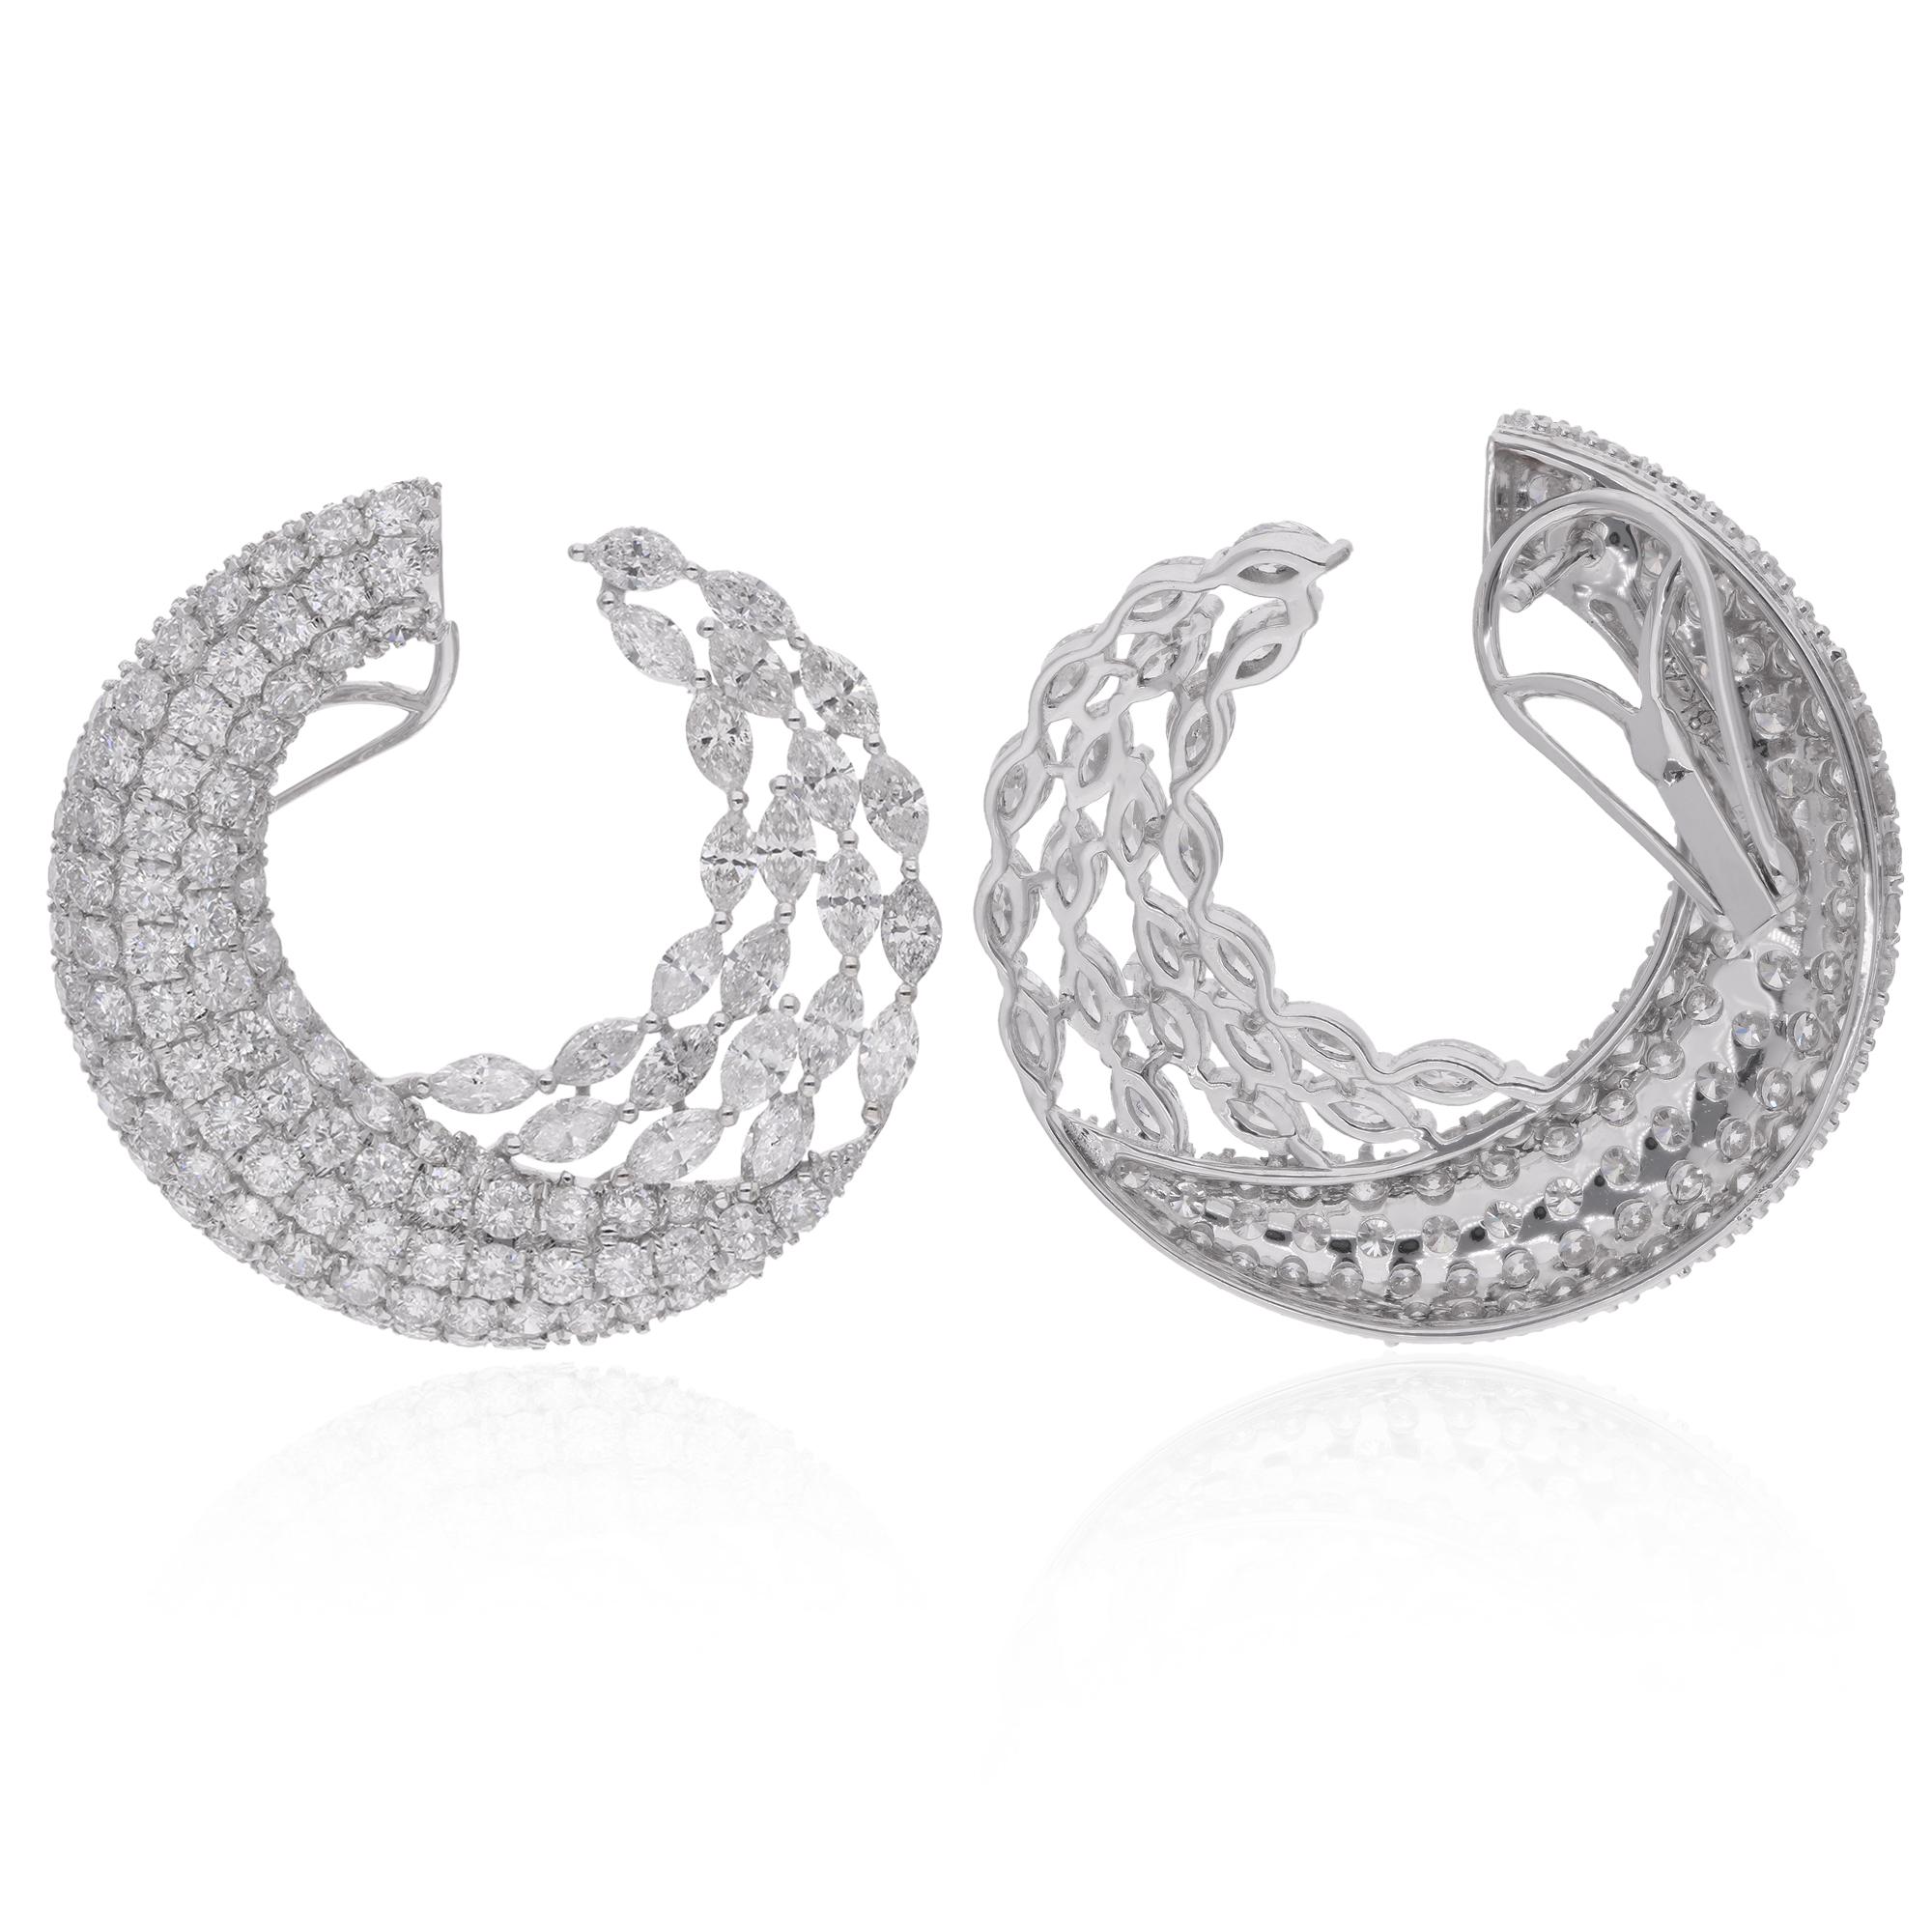 At the center of each hoop earring, a resplendent array of marquise and round-cut diamonds commands attention. These diamonds, totaling an impressive 8.76 carats, are meticulously selected for their exceptional brilliance, clarity, and fire. Each